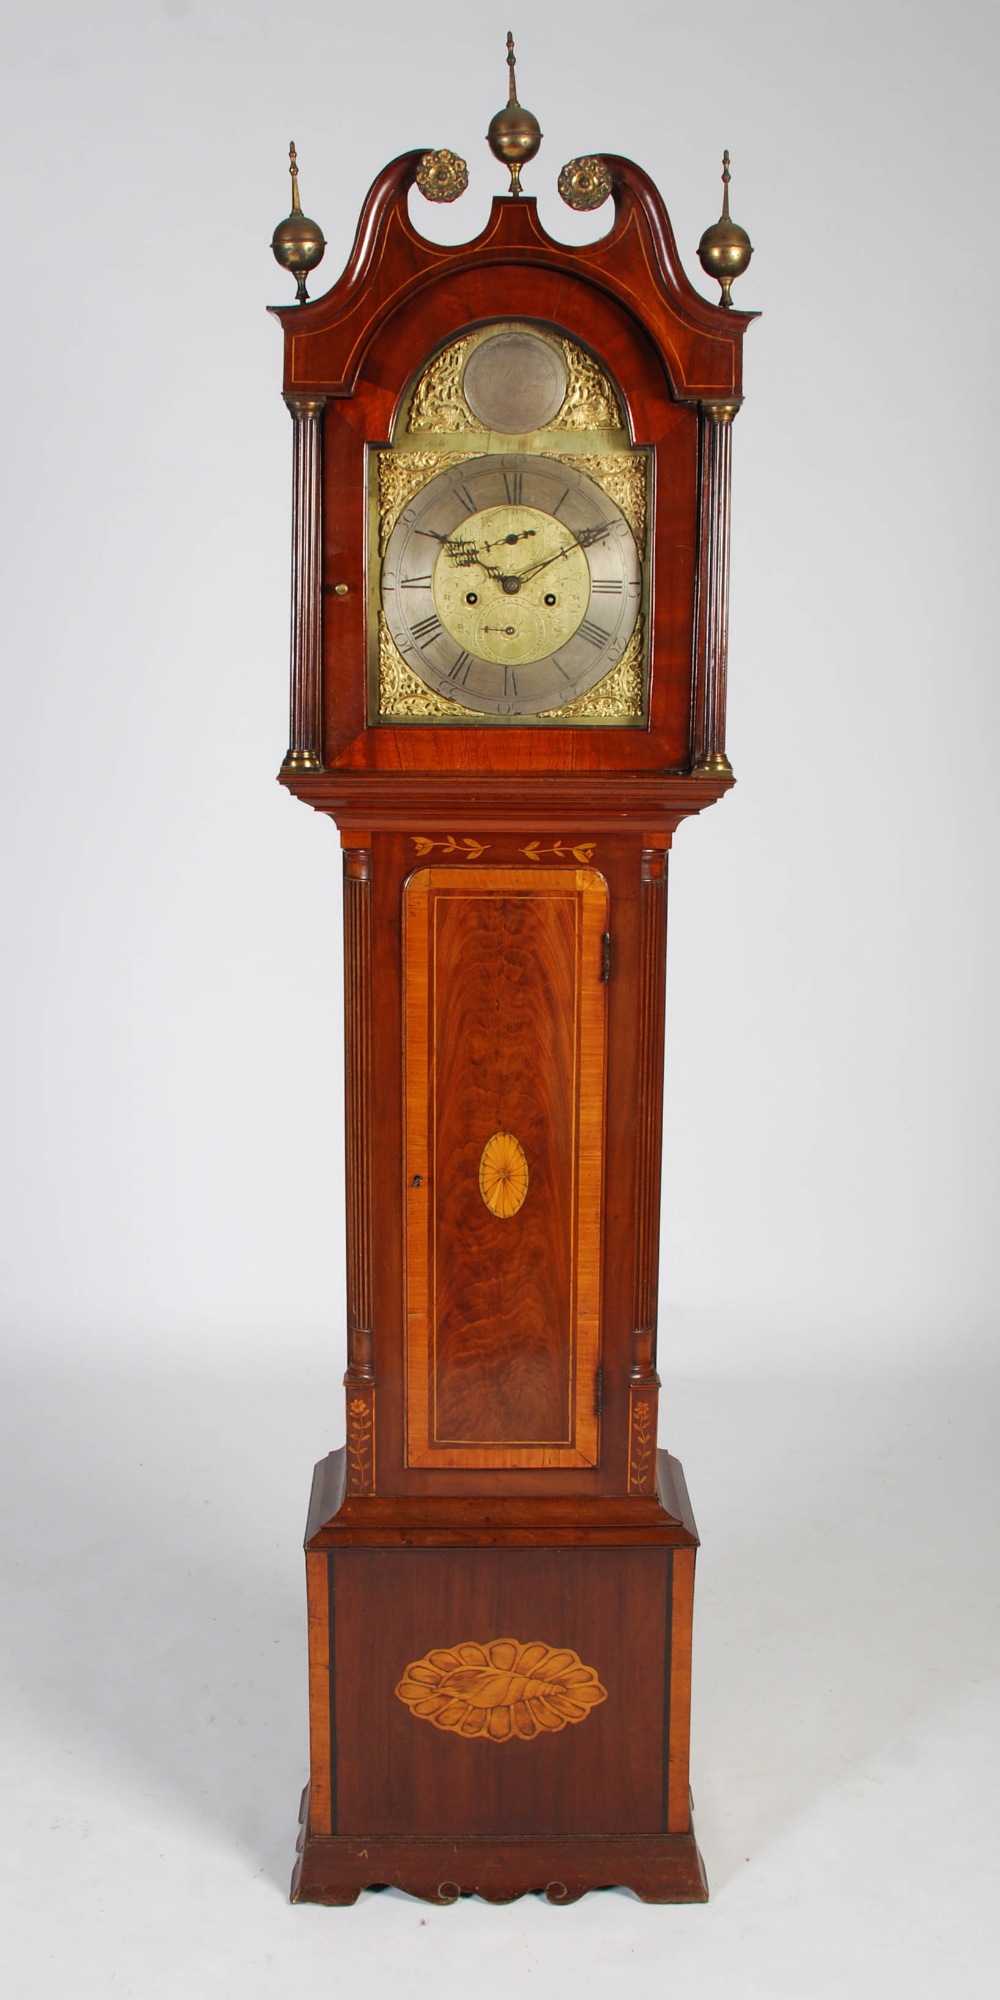 A Late 18th/ early 19th century mahogany and marquetry inlaid longcase clock, A. Buchan, Bridgend,